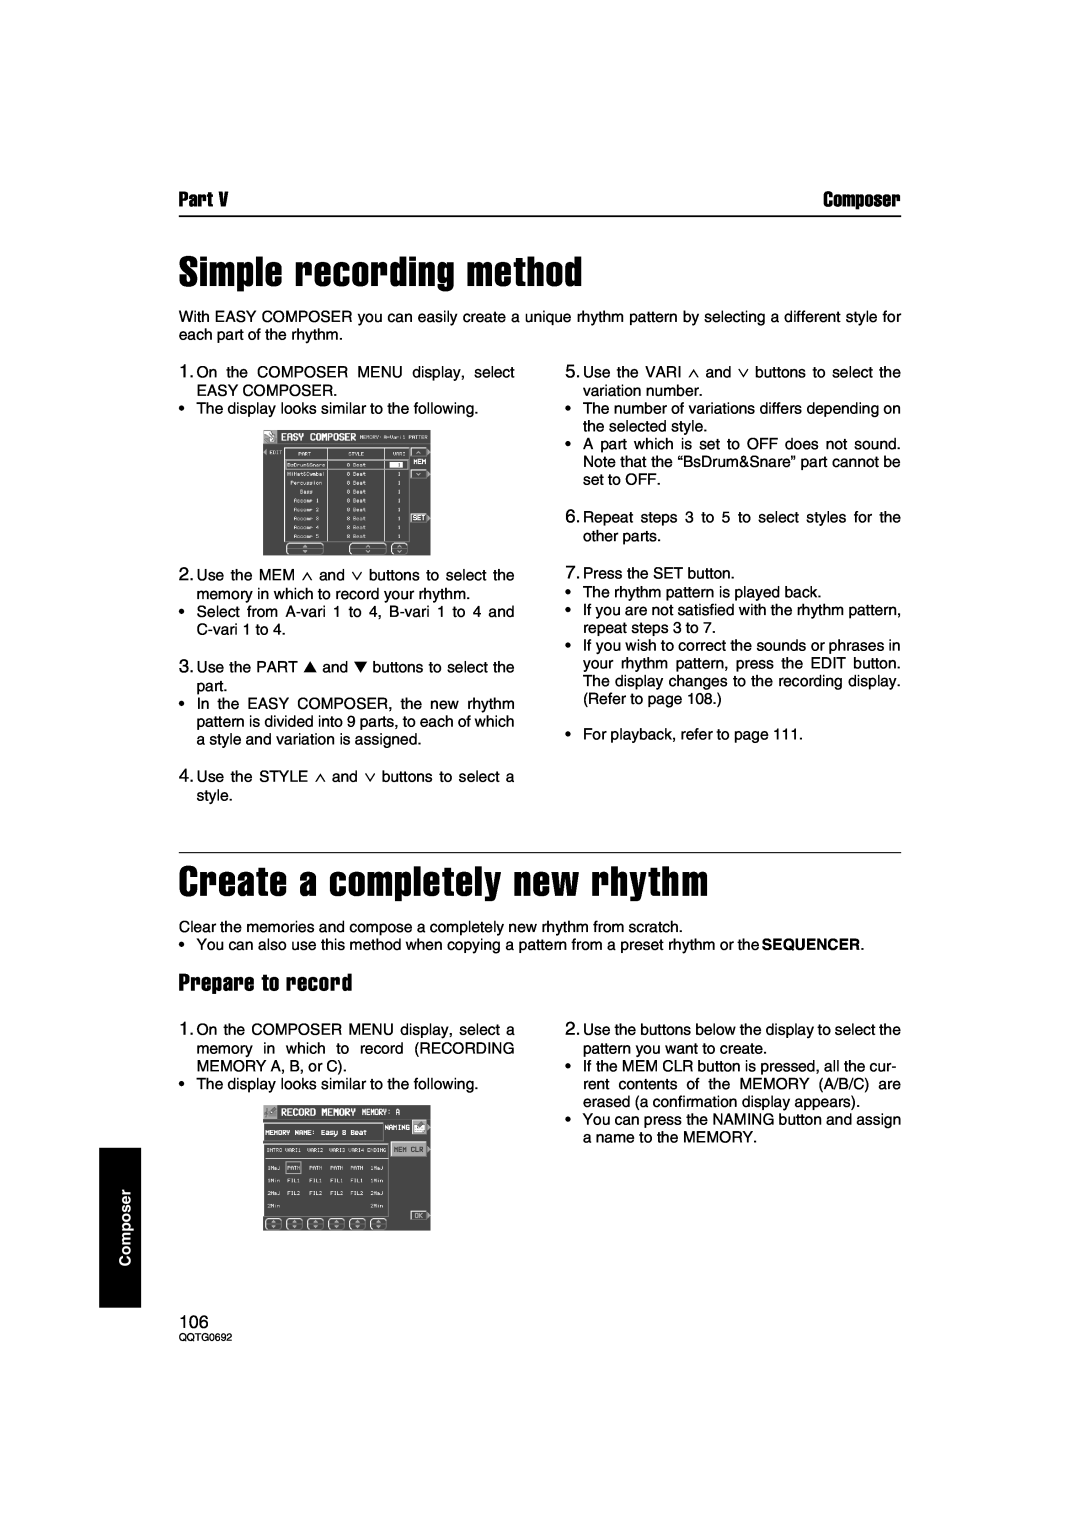 Panasonic SX-KN2600, SX-KN2400 Simple recording method, Create a completely new rhythm, Prepare to record, Part, Composer 